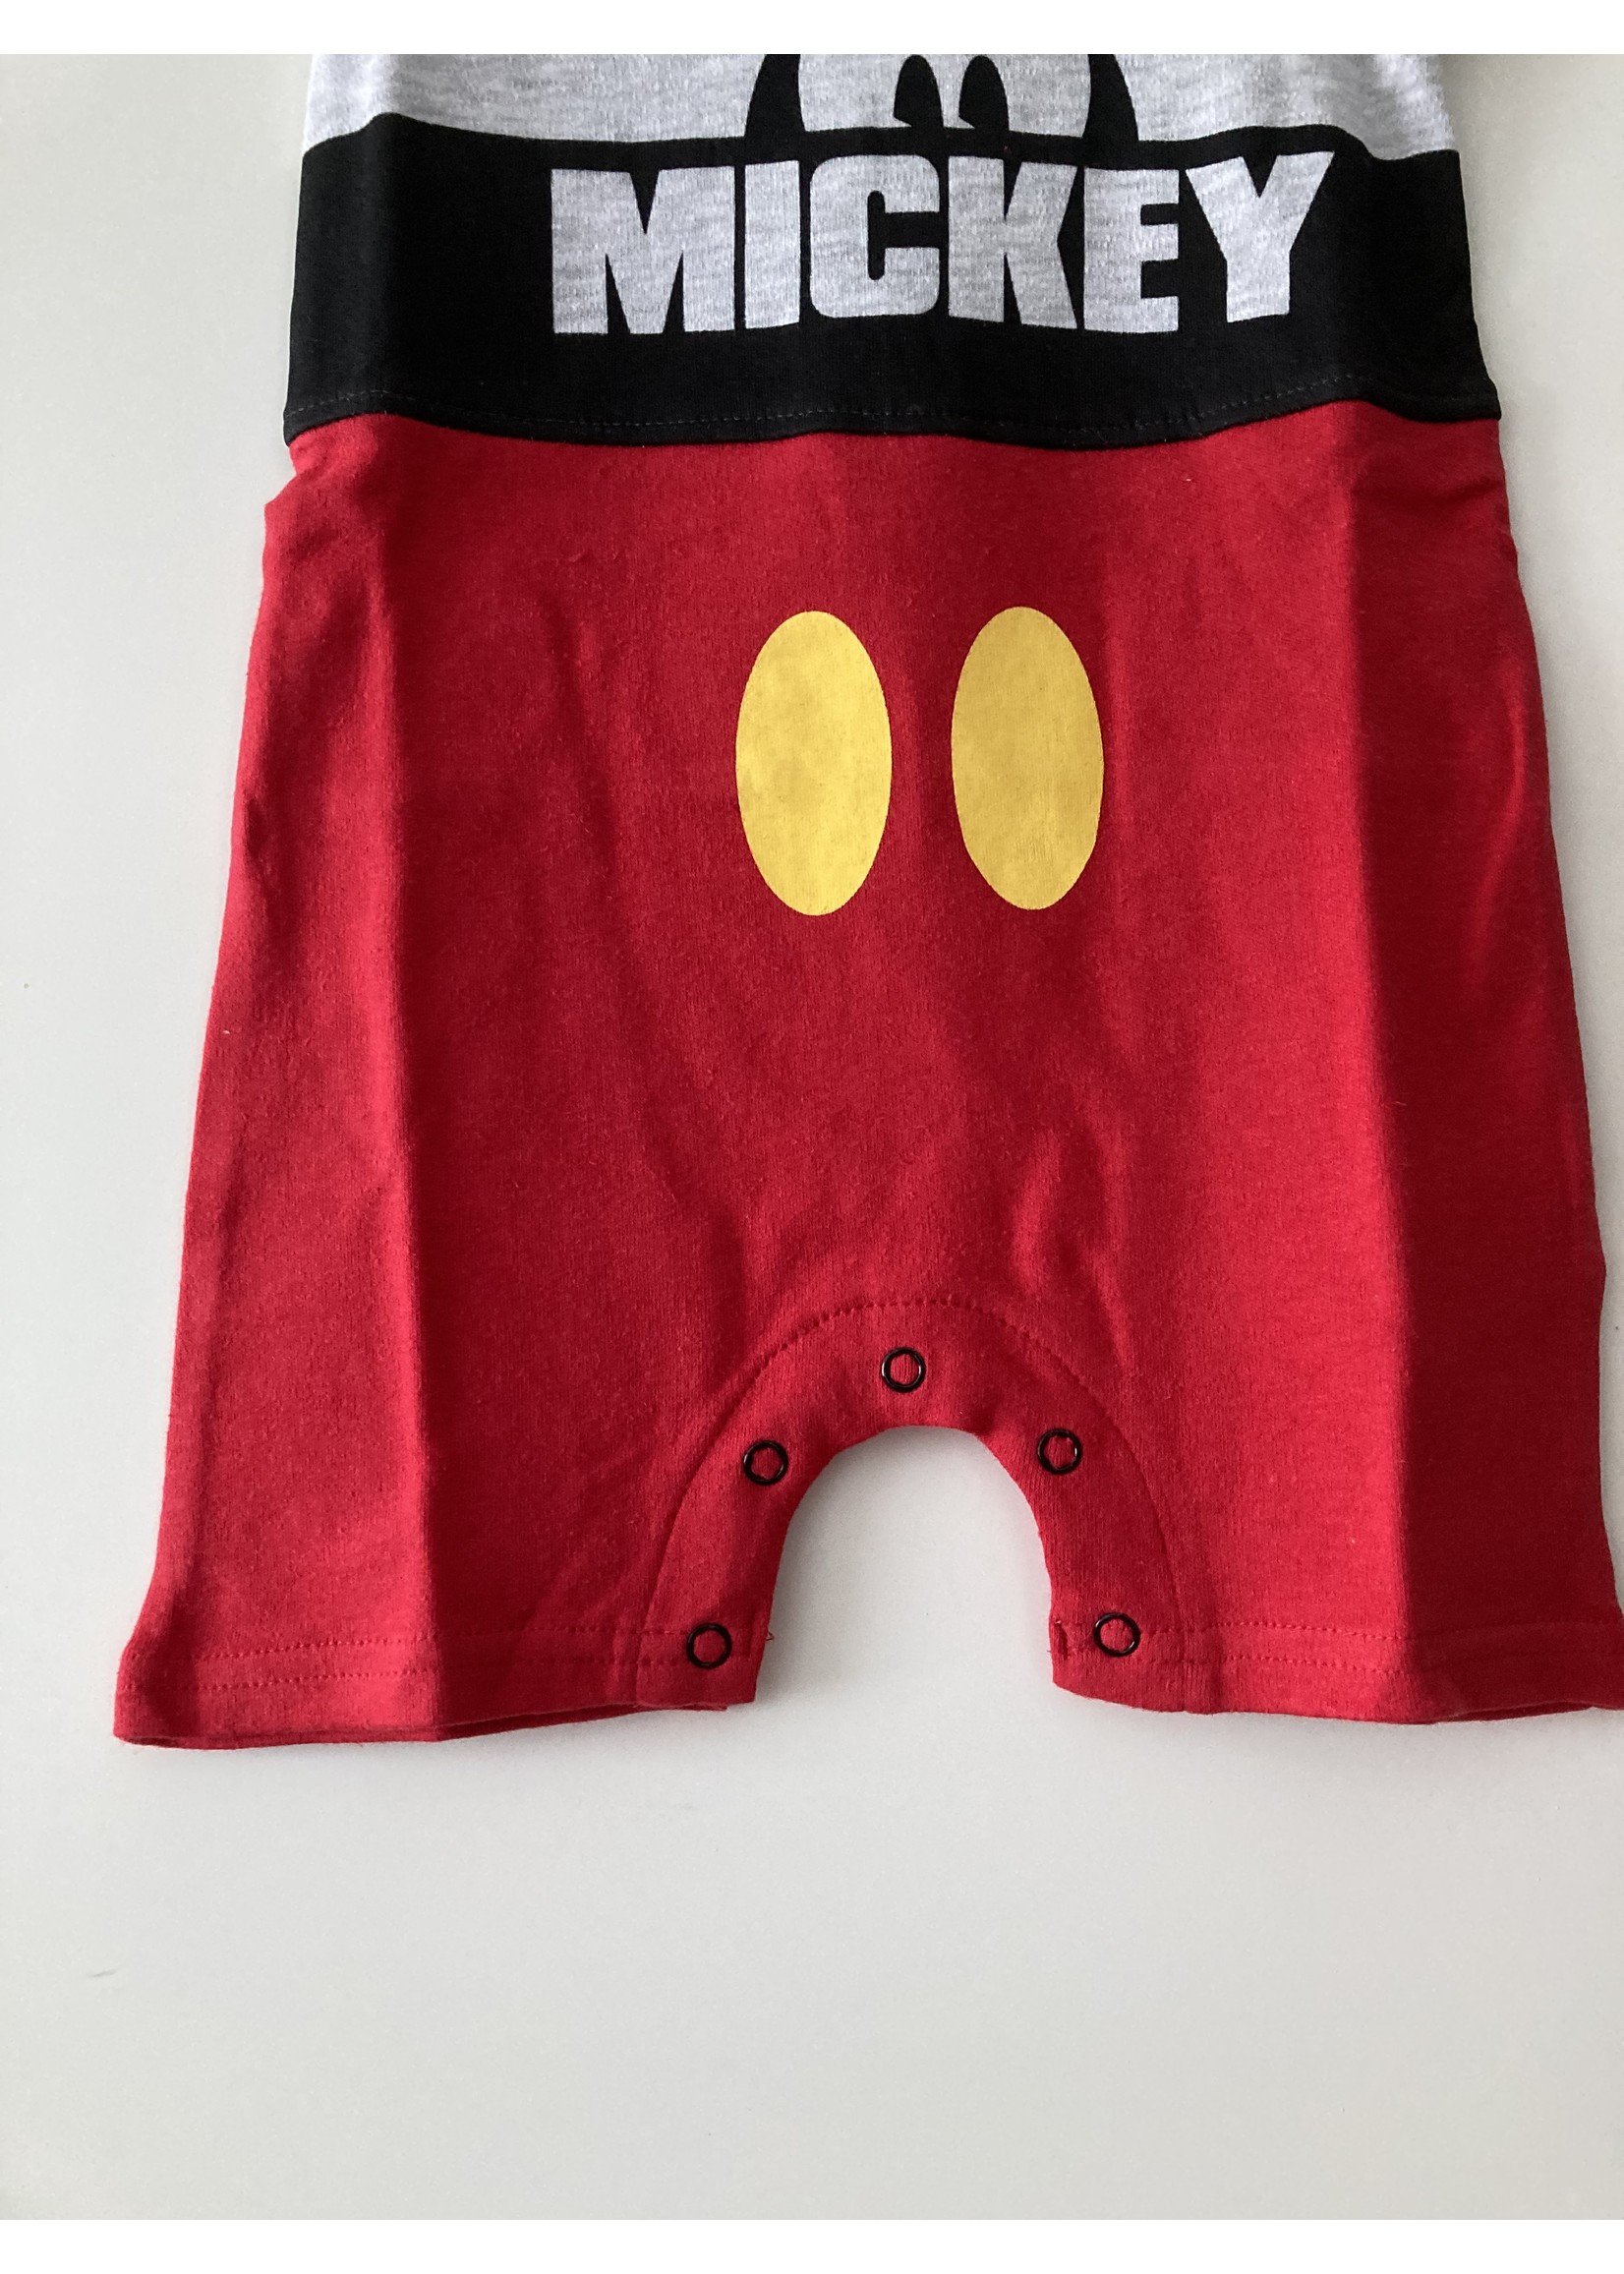 Disney baby Mickey Mouse romper from Disney baby gray